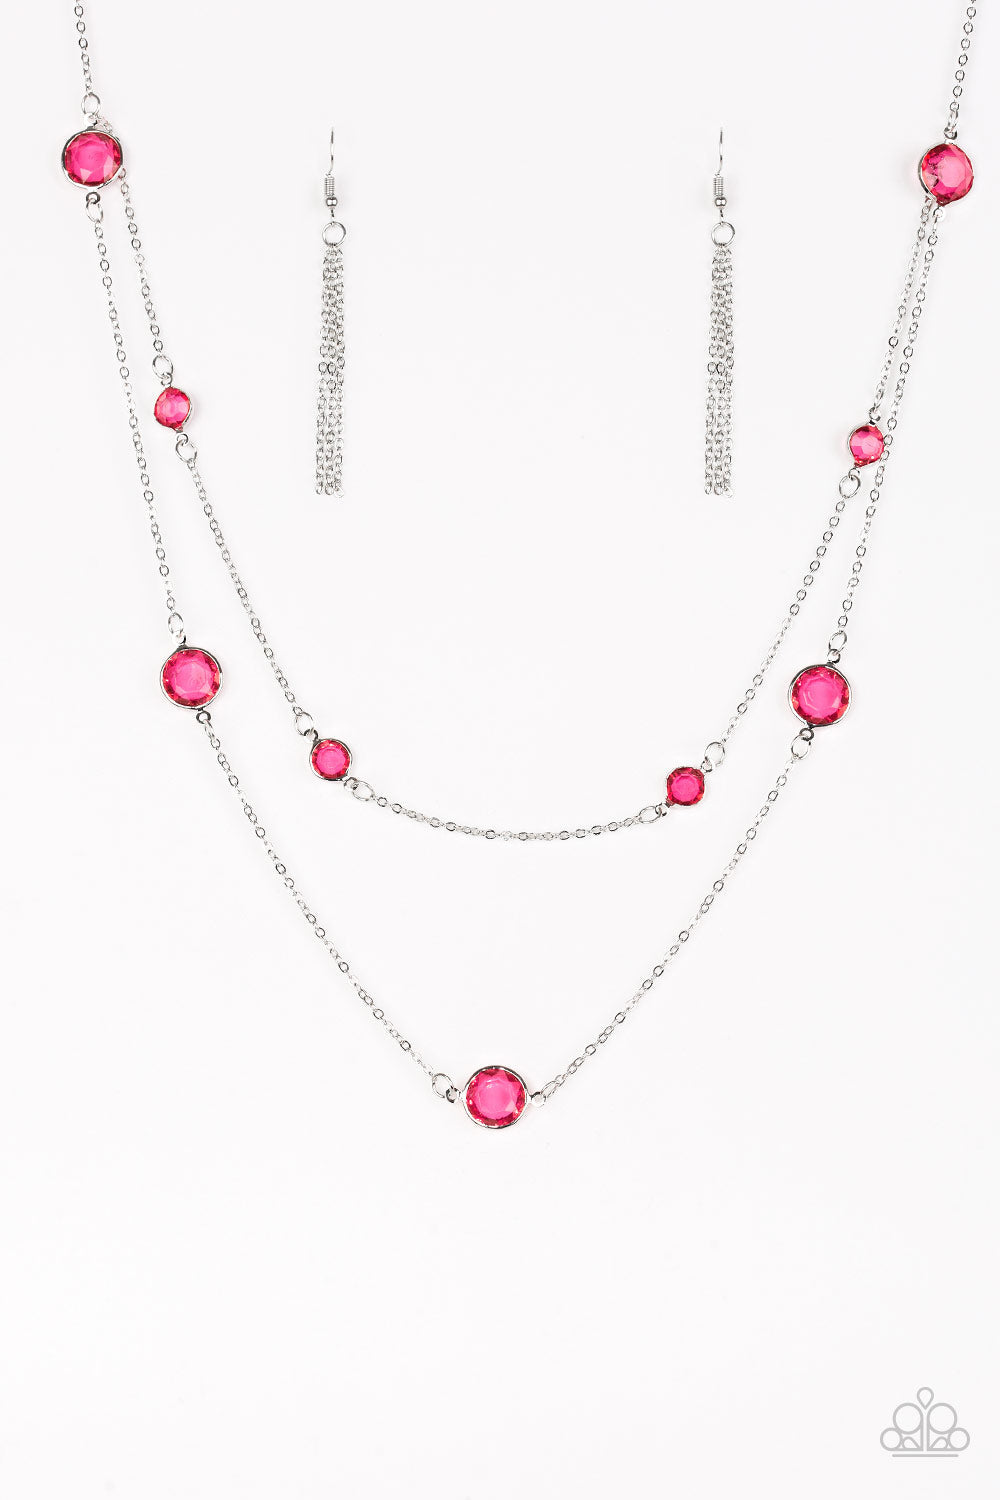 Raise Your Glass - Pink and Silver Necklace - Paparazzi Accessories - Varying in size, glassy pink gems trickle along dainty silver chains, creating sparkling layers across the chest.